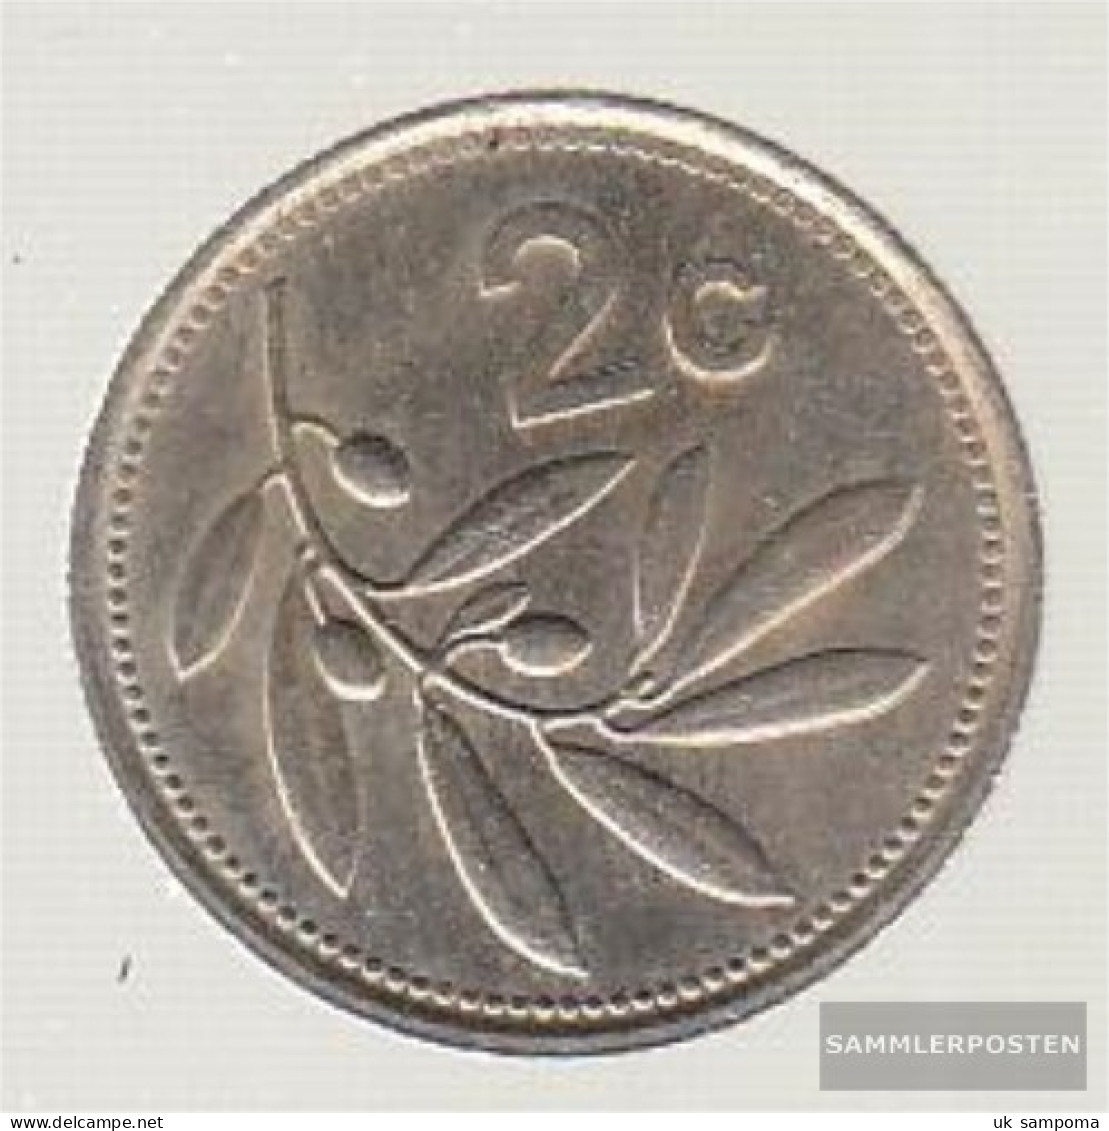 Malta Km-number. : 79 1986 Extremely Fine Copper-Nickel Extremely Fine 1986 2 Cent Emblem - Malta